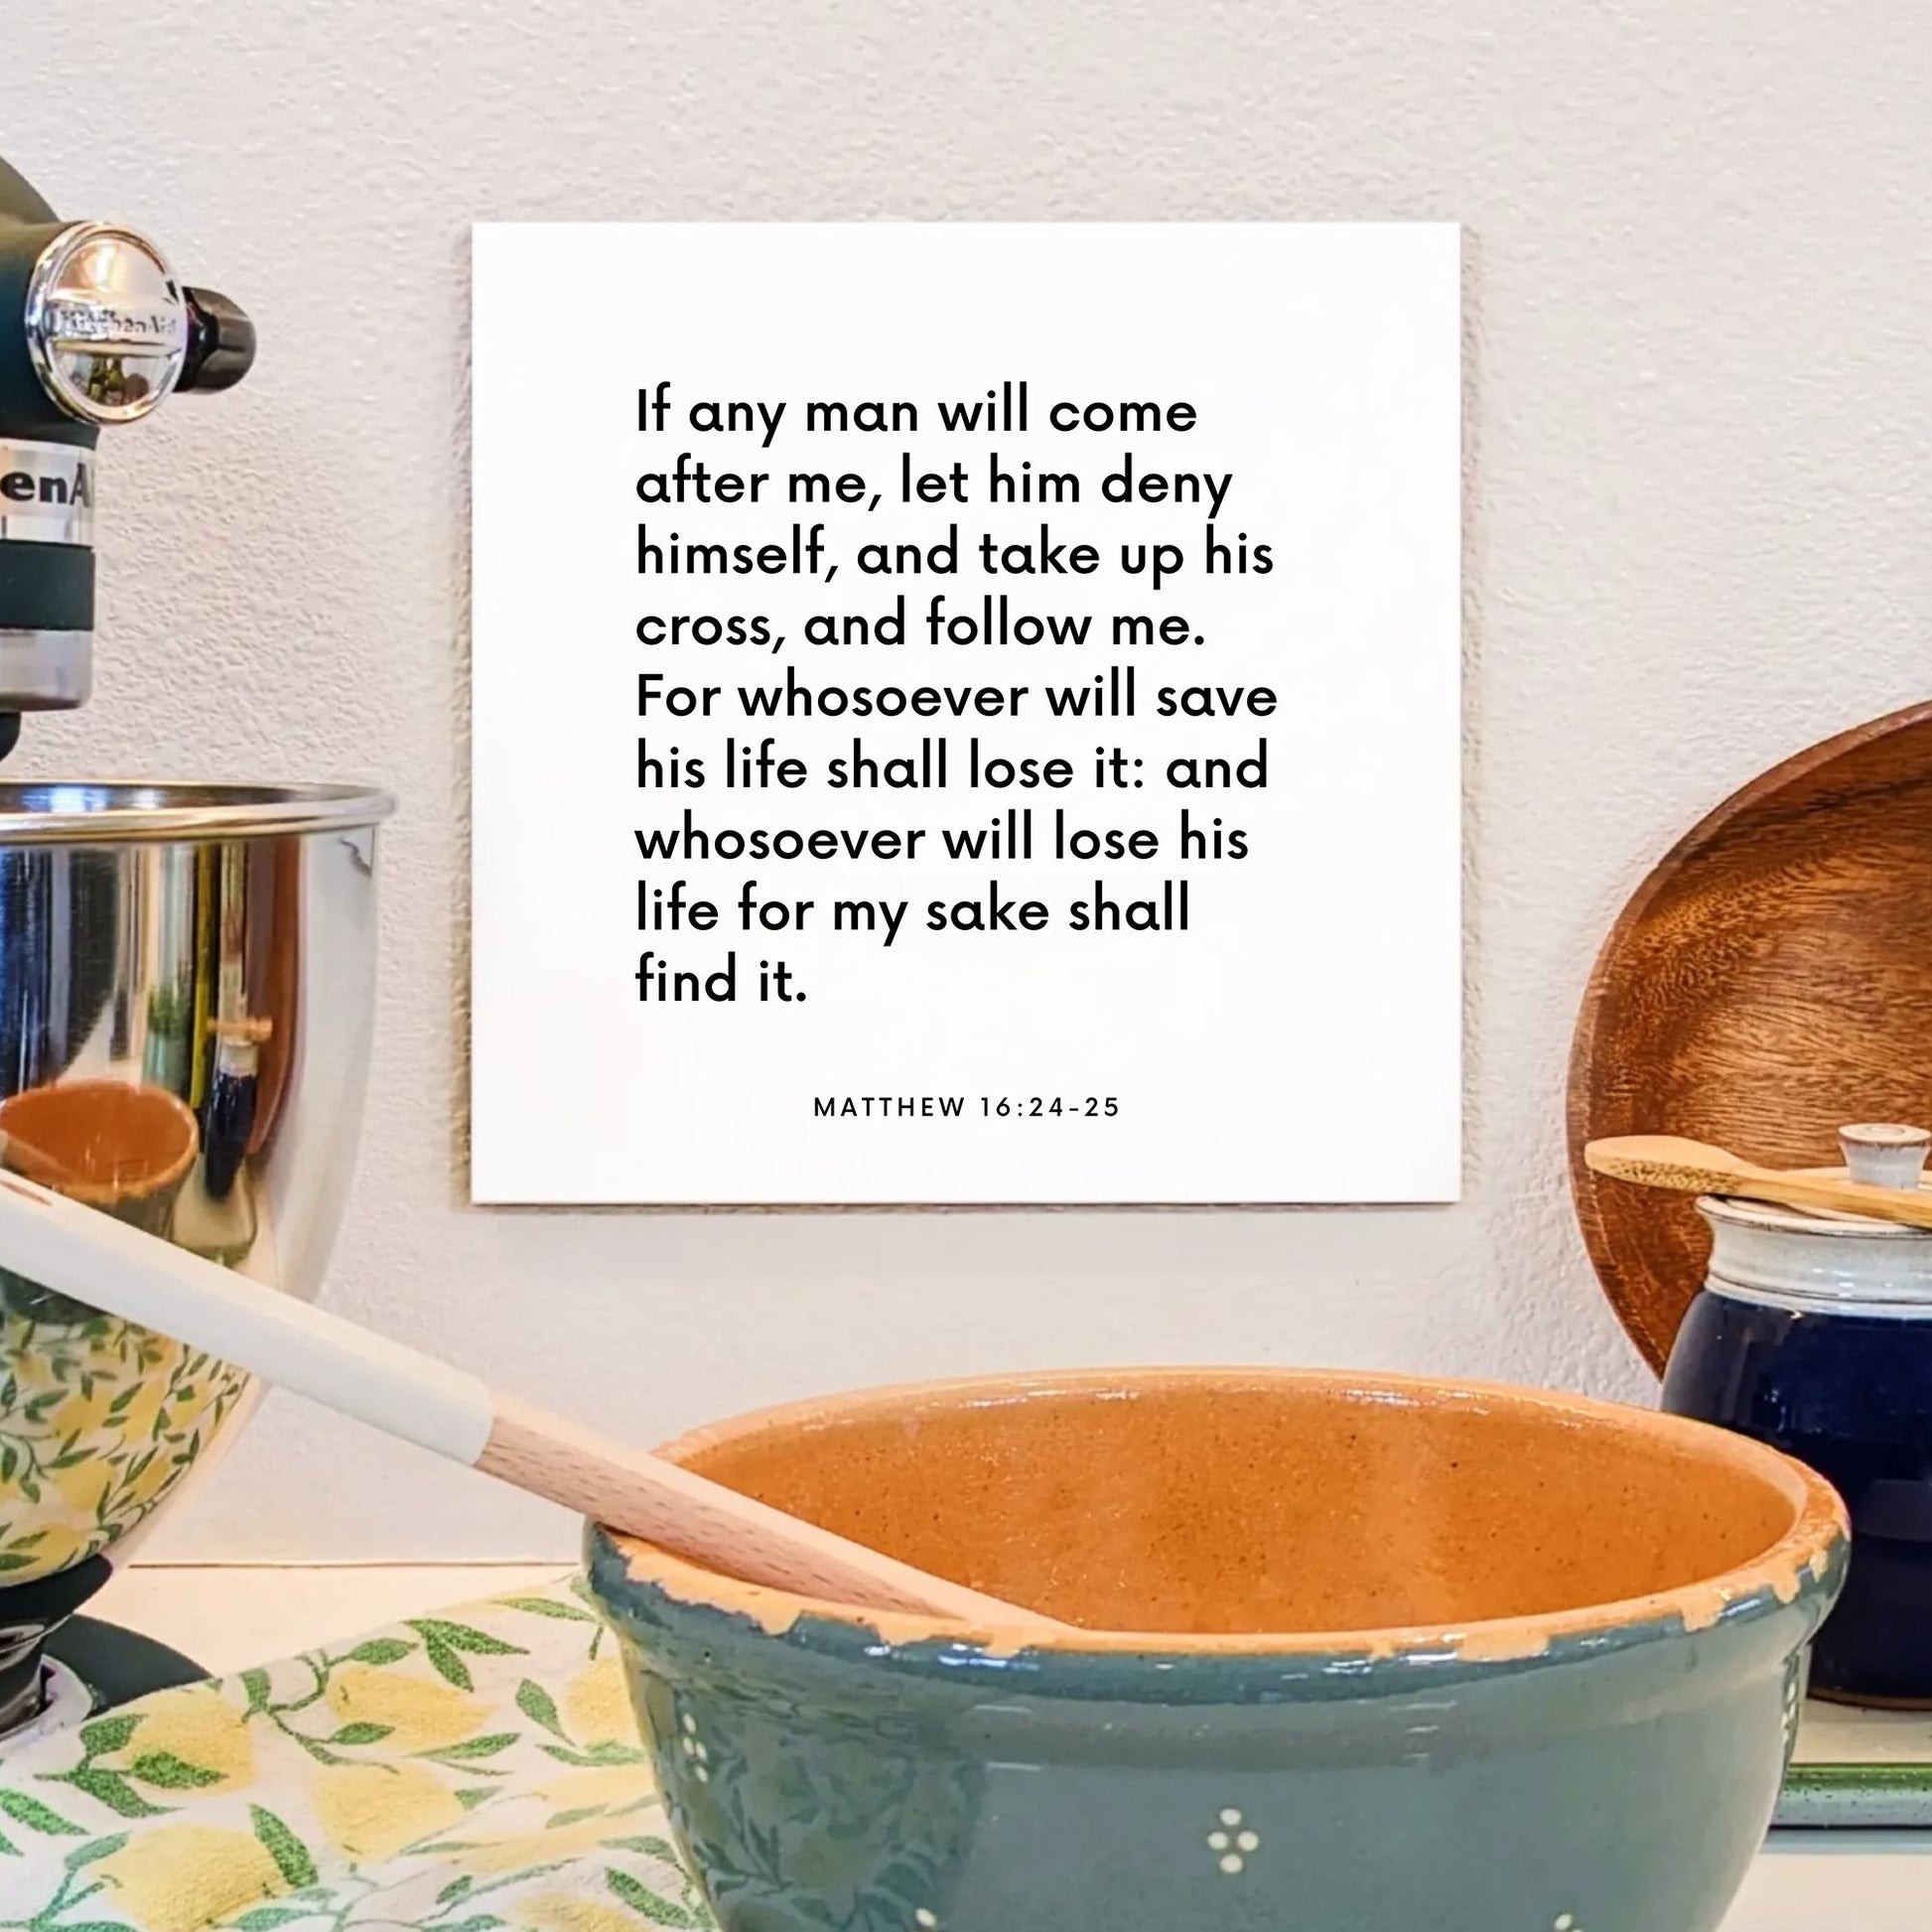 Kitchen mouting of the scripture tile for Matthew 16:24-25 - "Whosoever will lose his life for my sake shall find it"